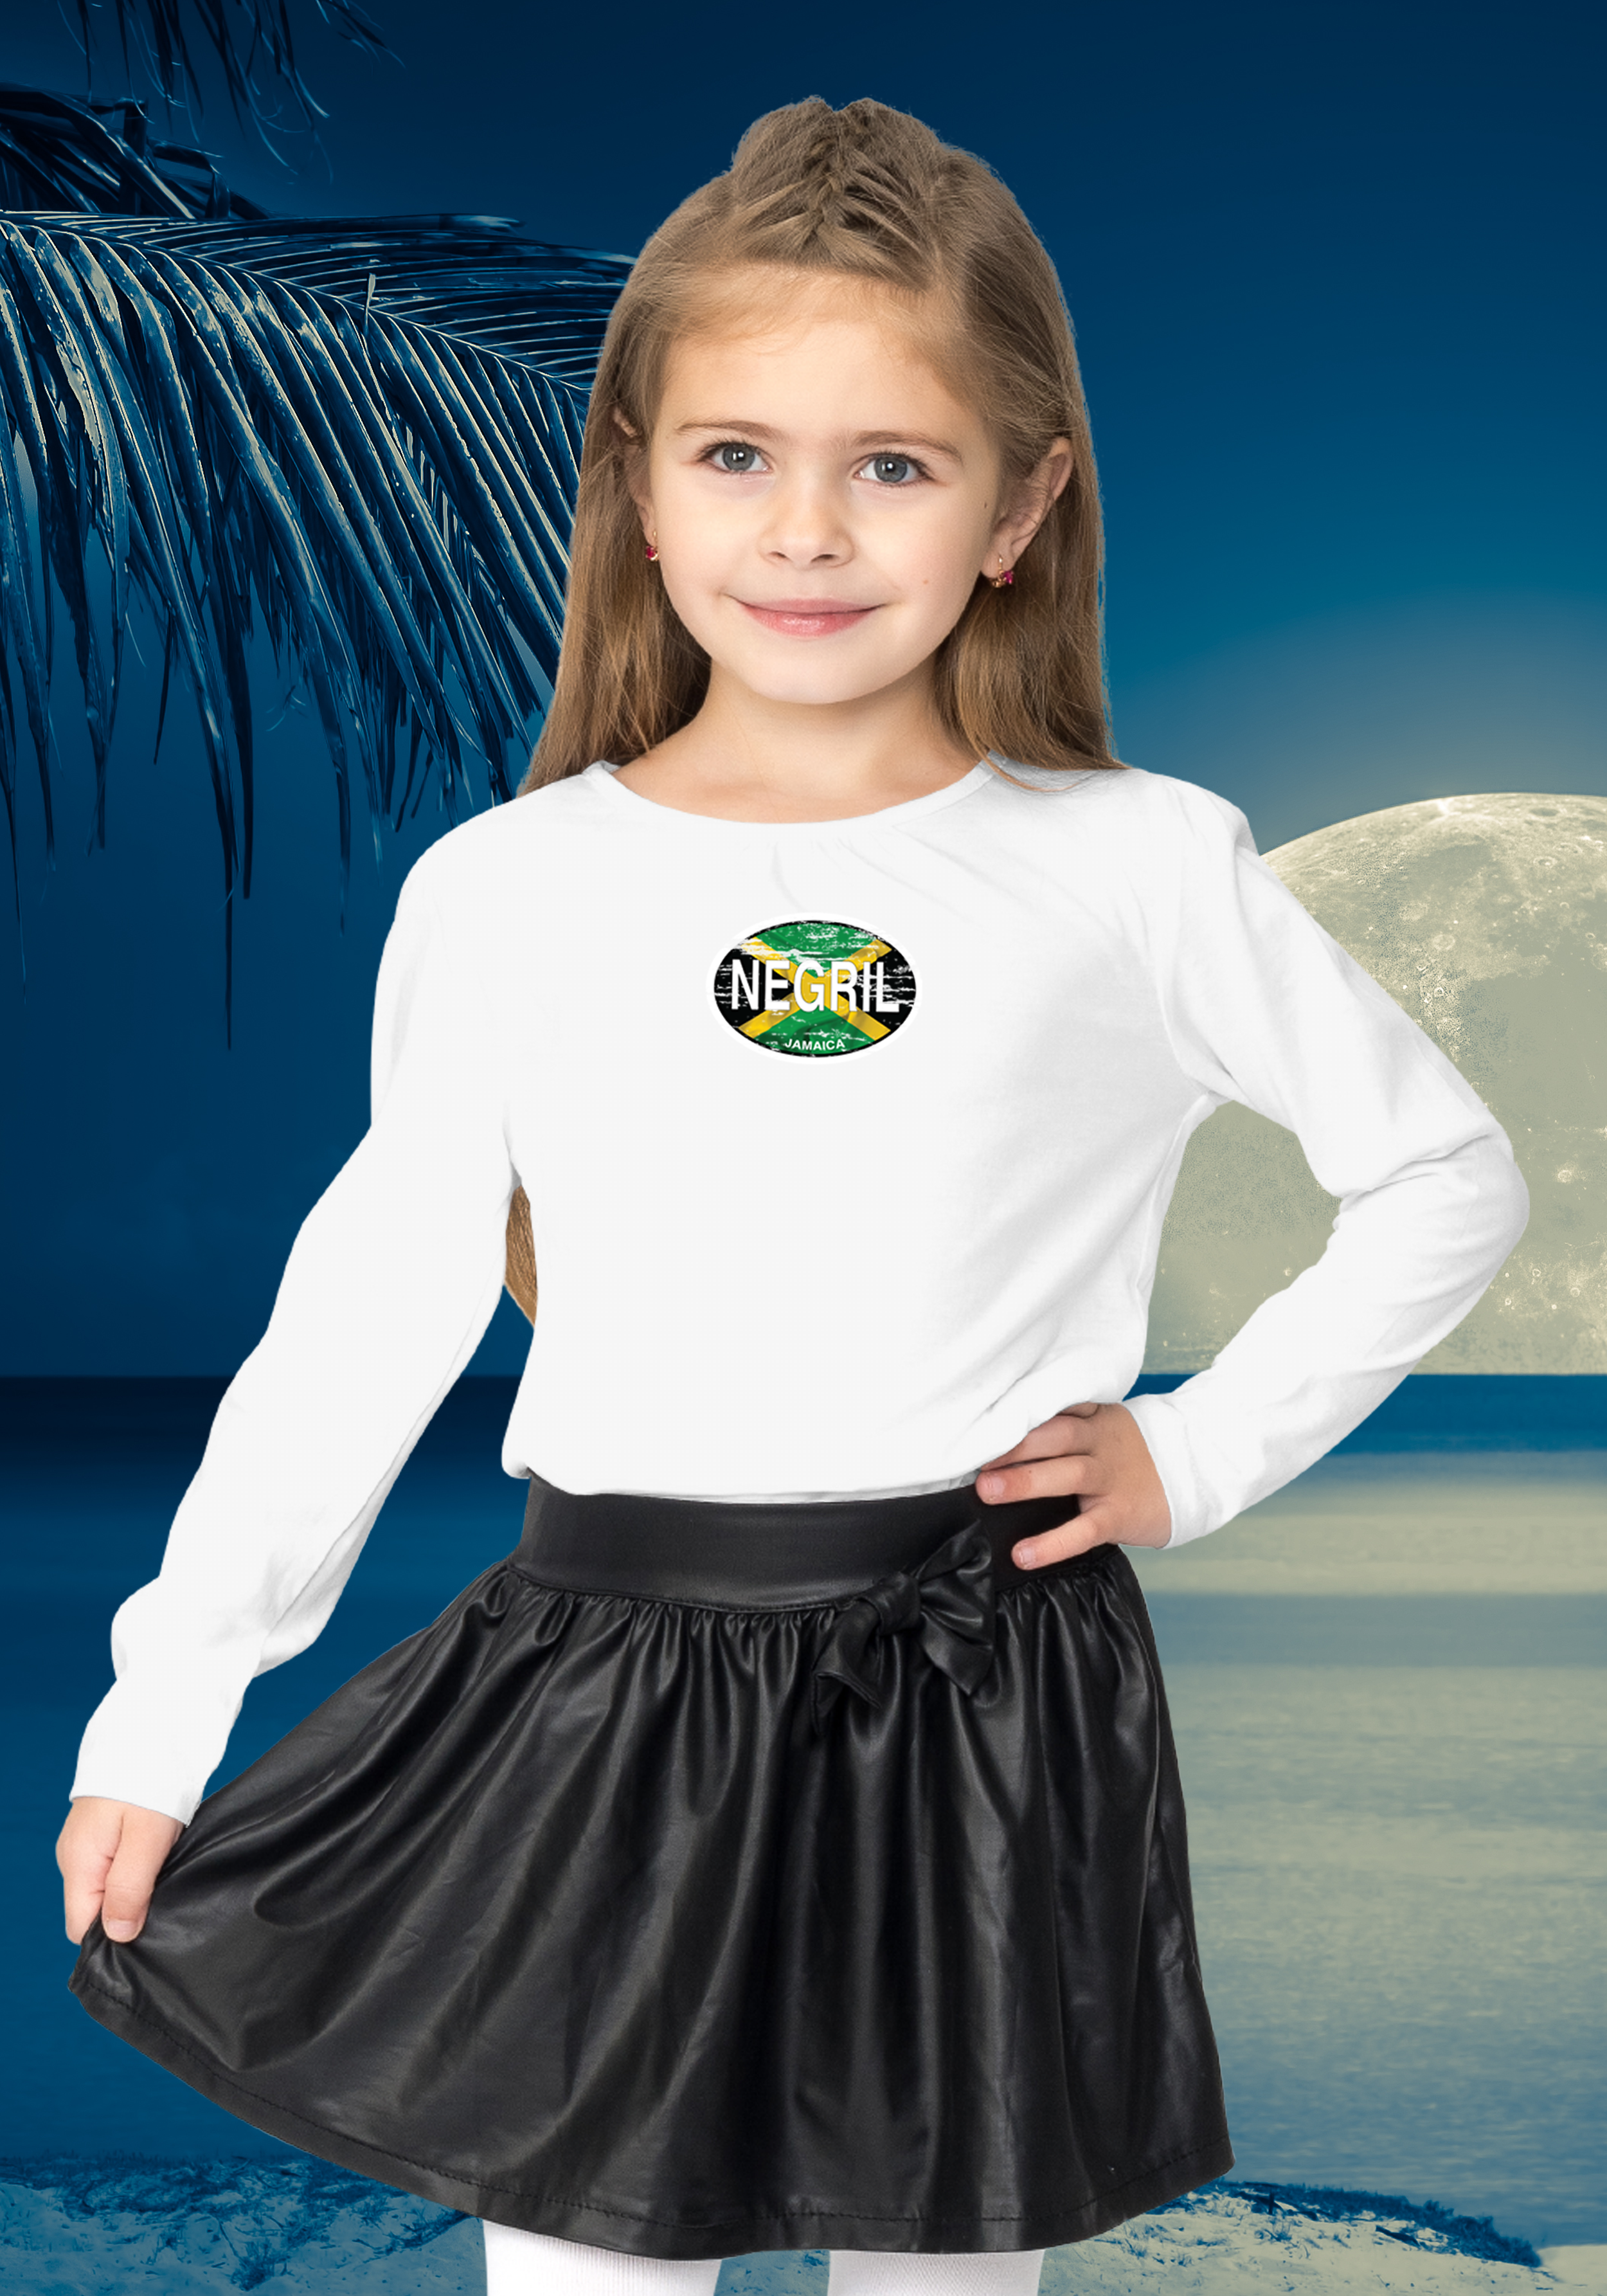 Negril Youth Flag Long Sleeve T-Shirts - My Destination Location